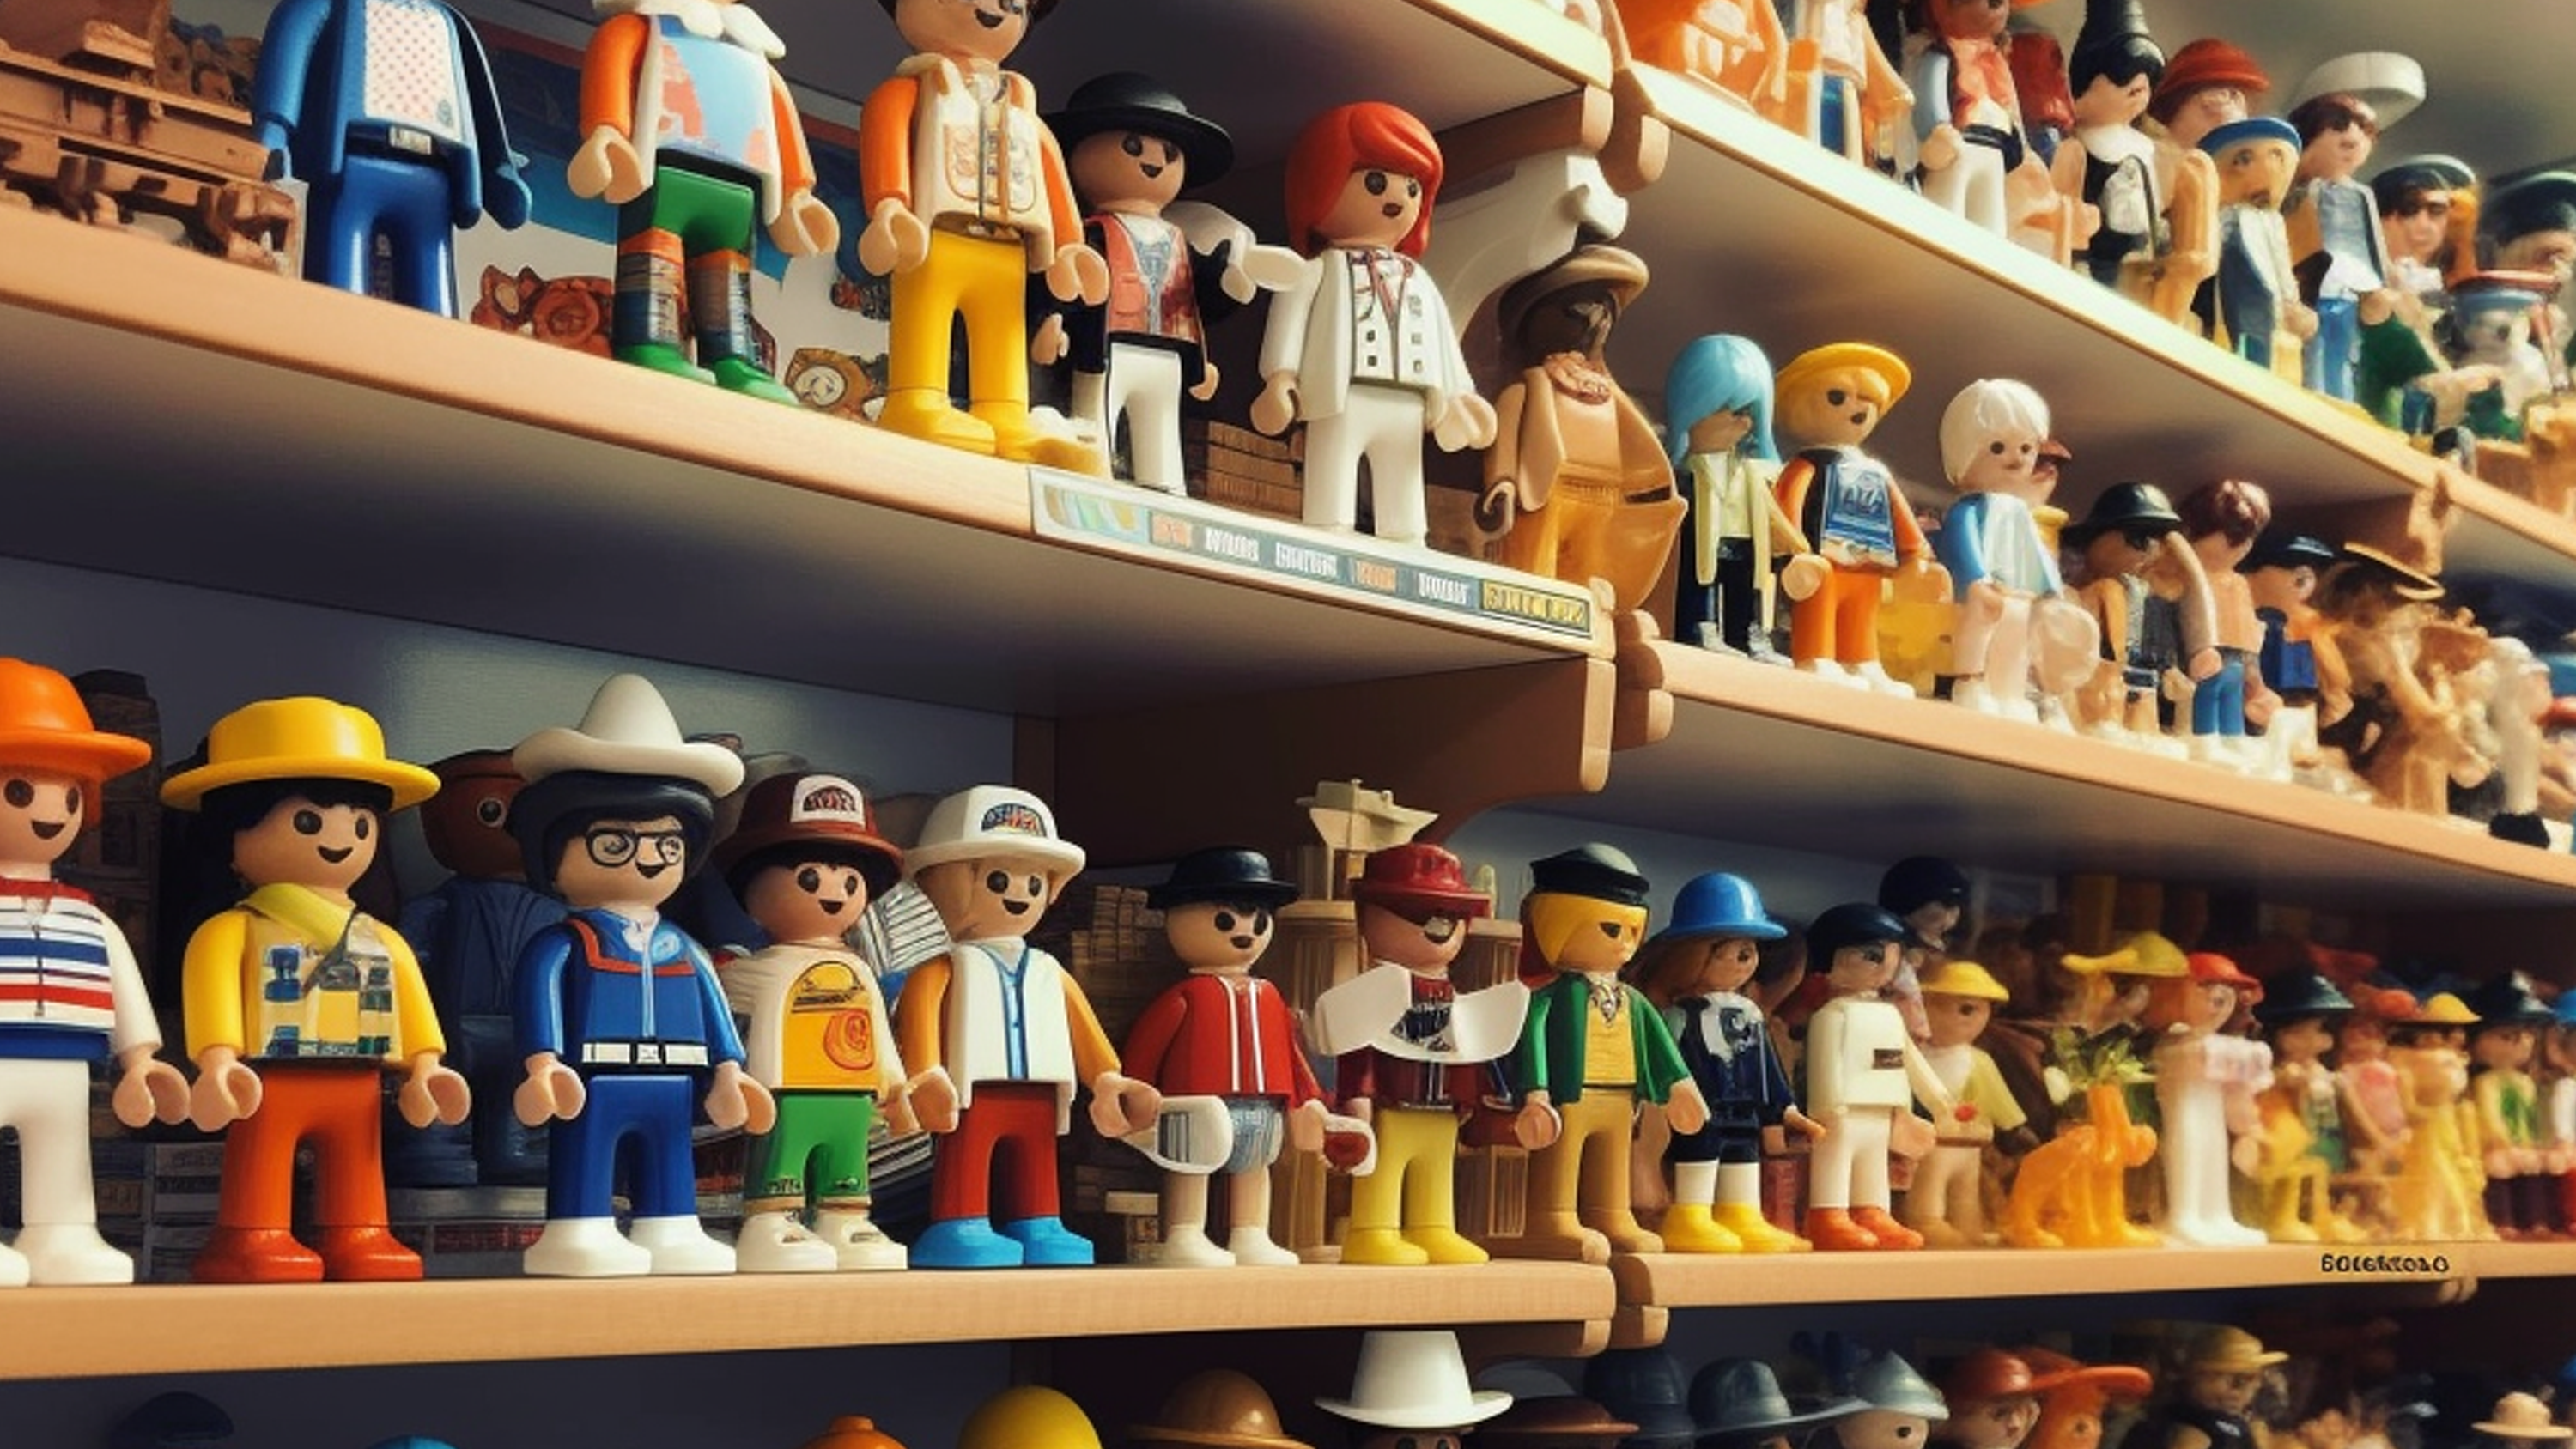 Playmobil: Inspiring Collaboration, Communication, and Creativity at Work